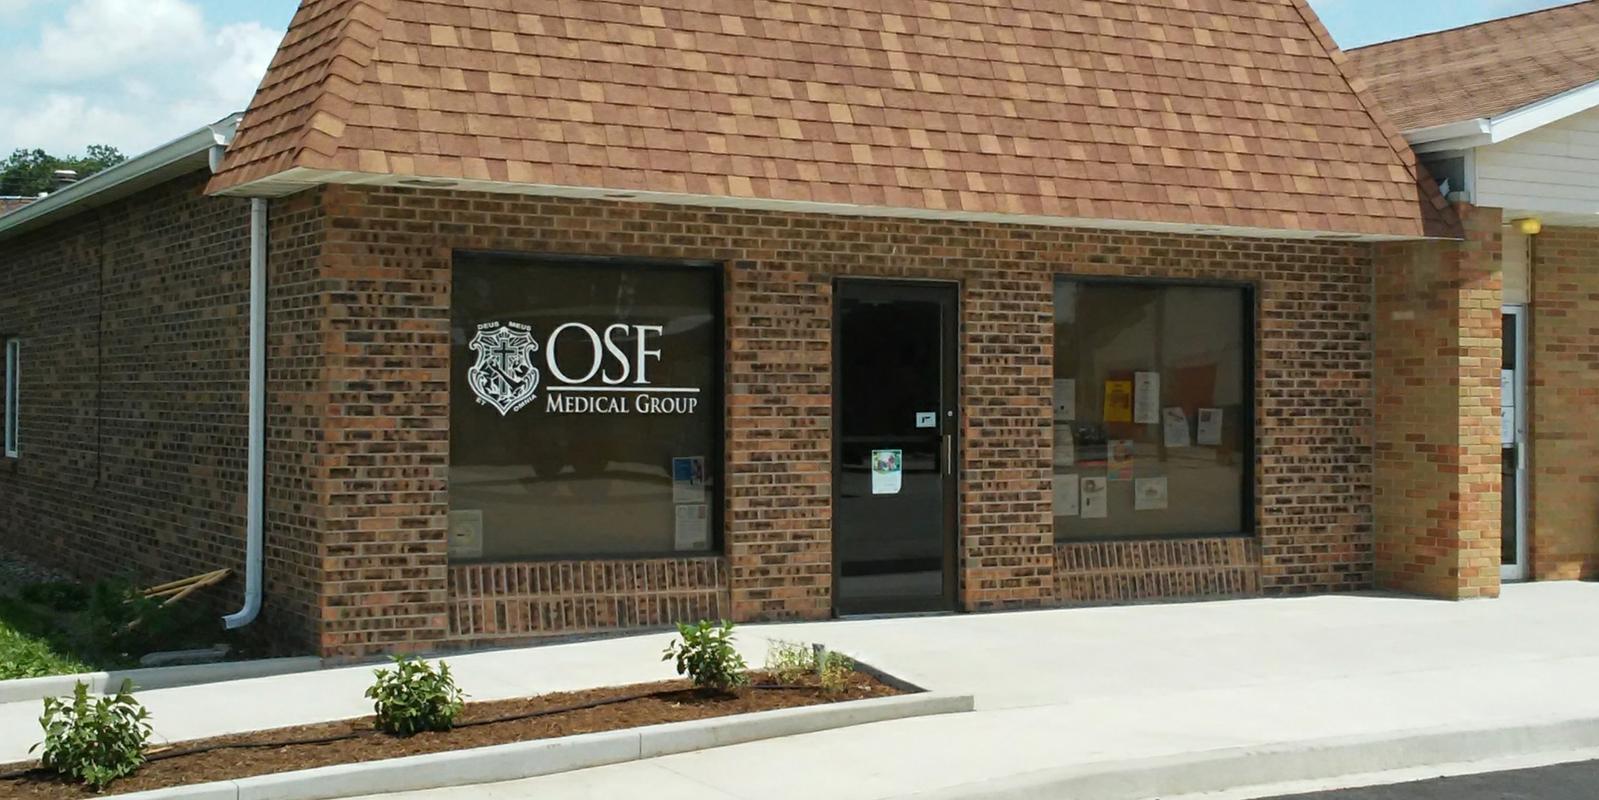 OSF Medical Group - Primary Care, 105 Hack Street, Cullom, Illinois, 60929